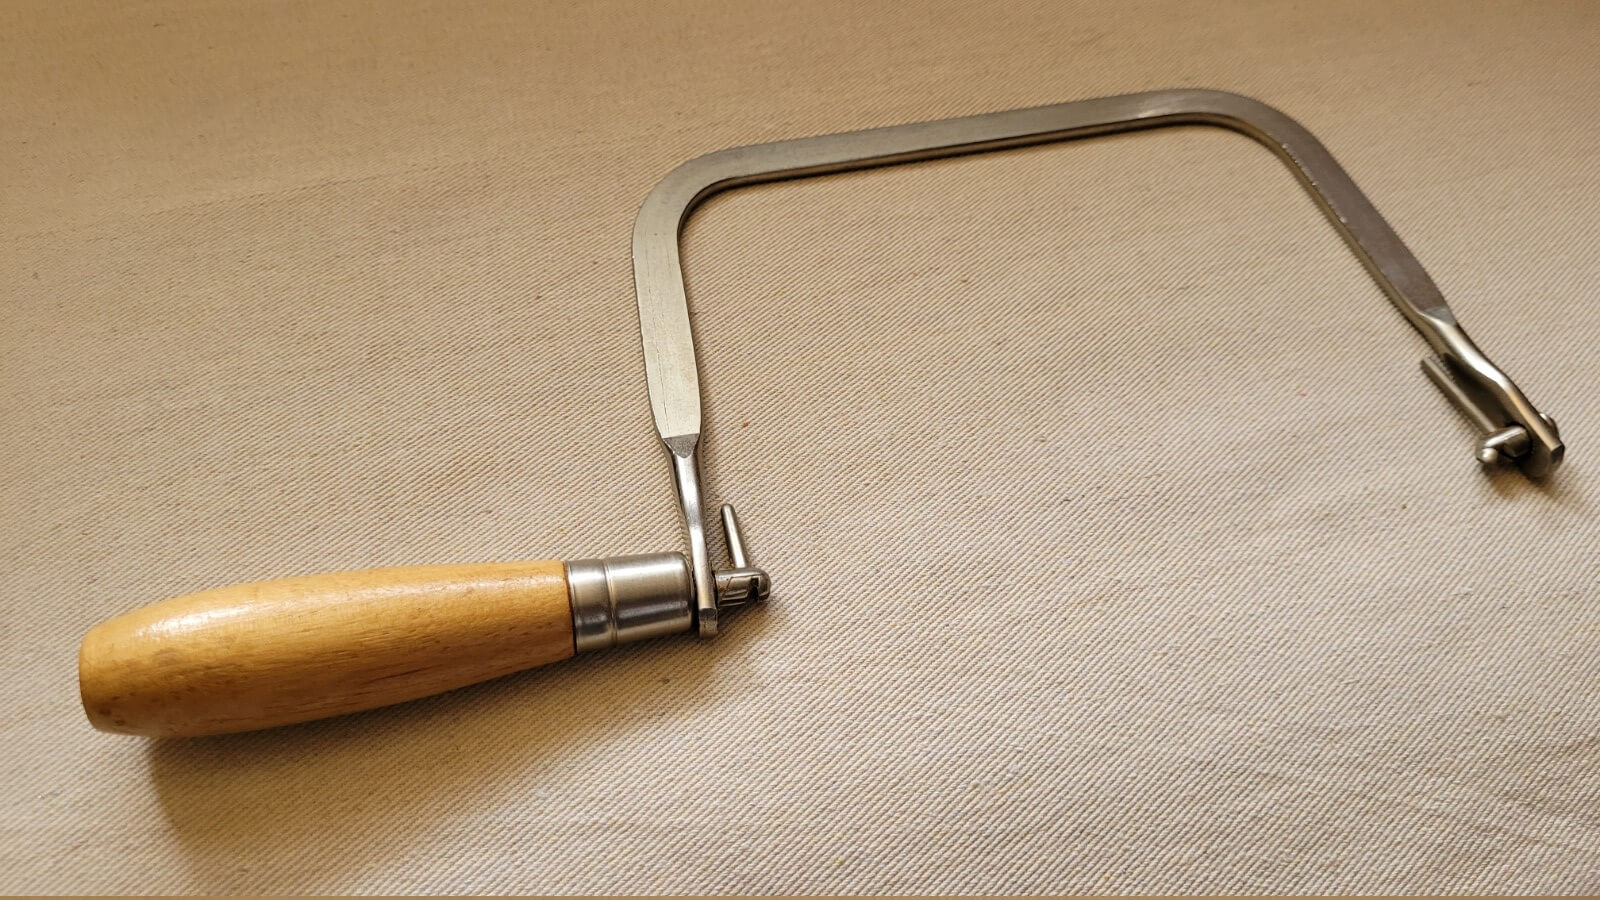 Rare Vintage Disston no 10 Coping Saw made in USA Woodworking and Jeweler Fine Tools